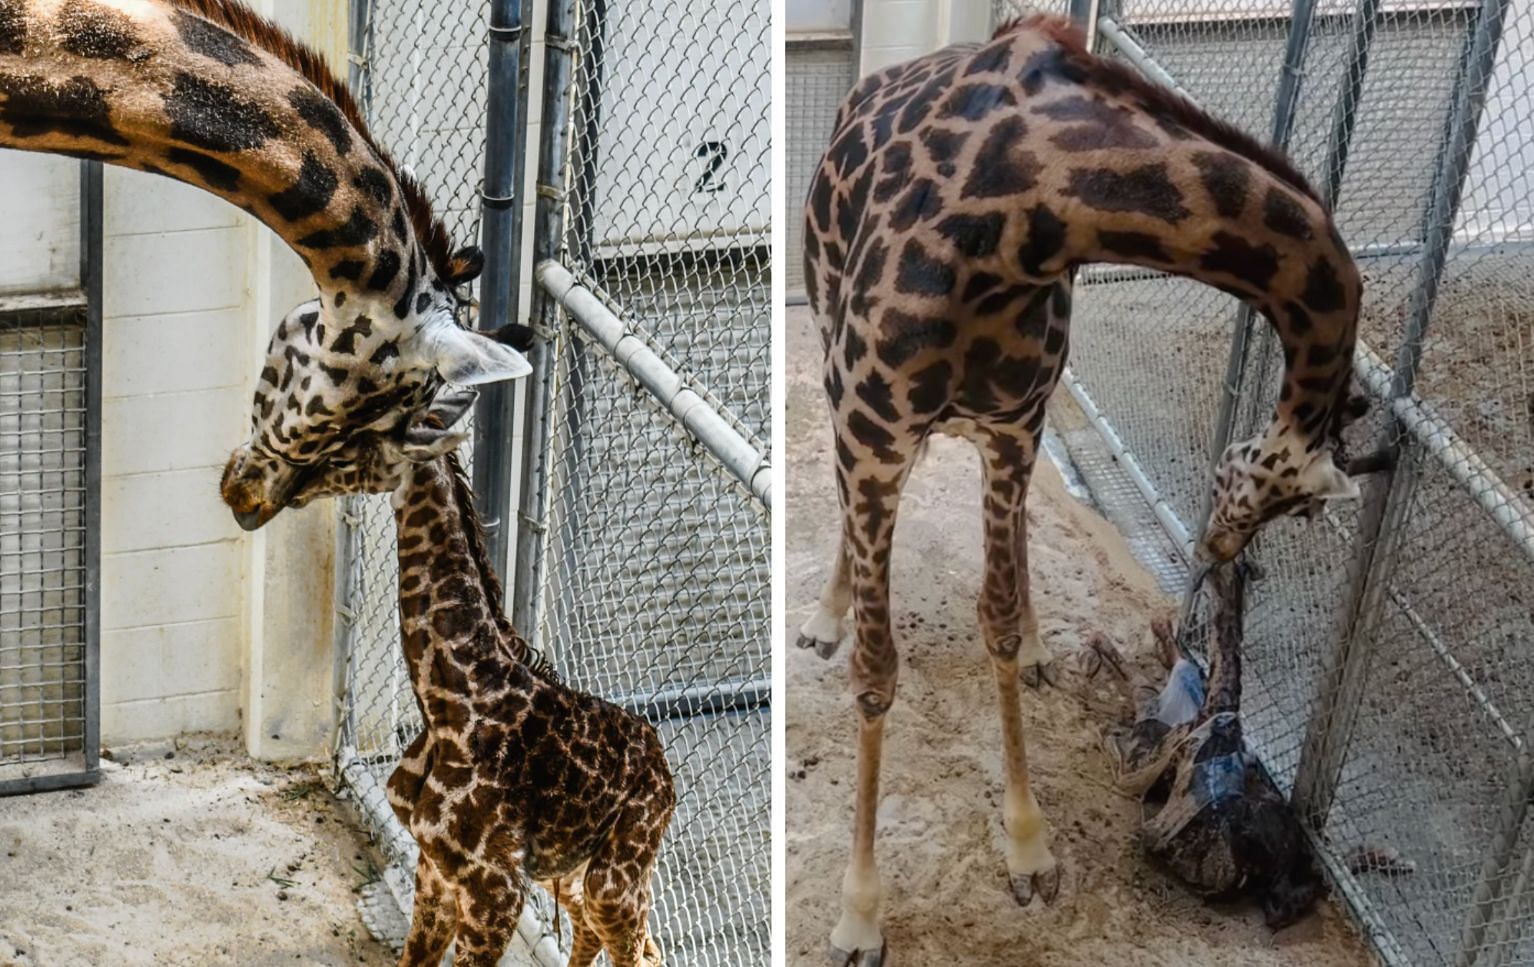 Mother giraffe gives birth to her ninth calf in Virgina Zoo: Details explored. (Images via Virginia Zoo Authorities)